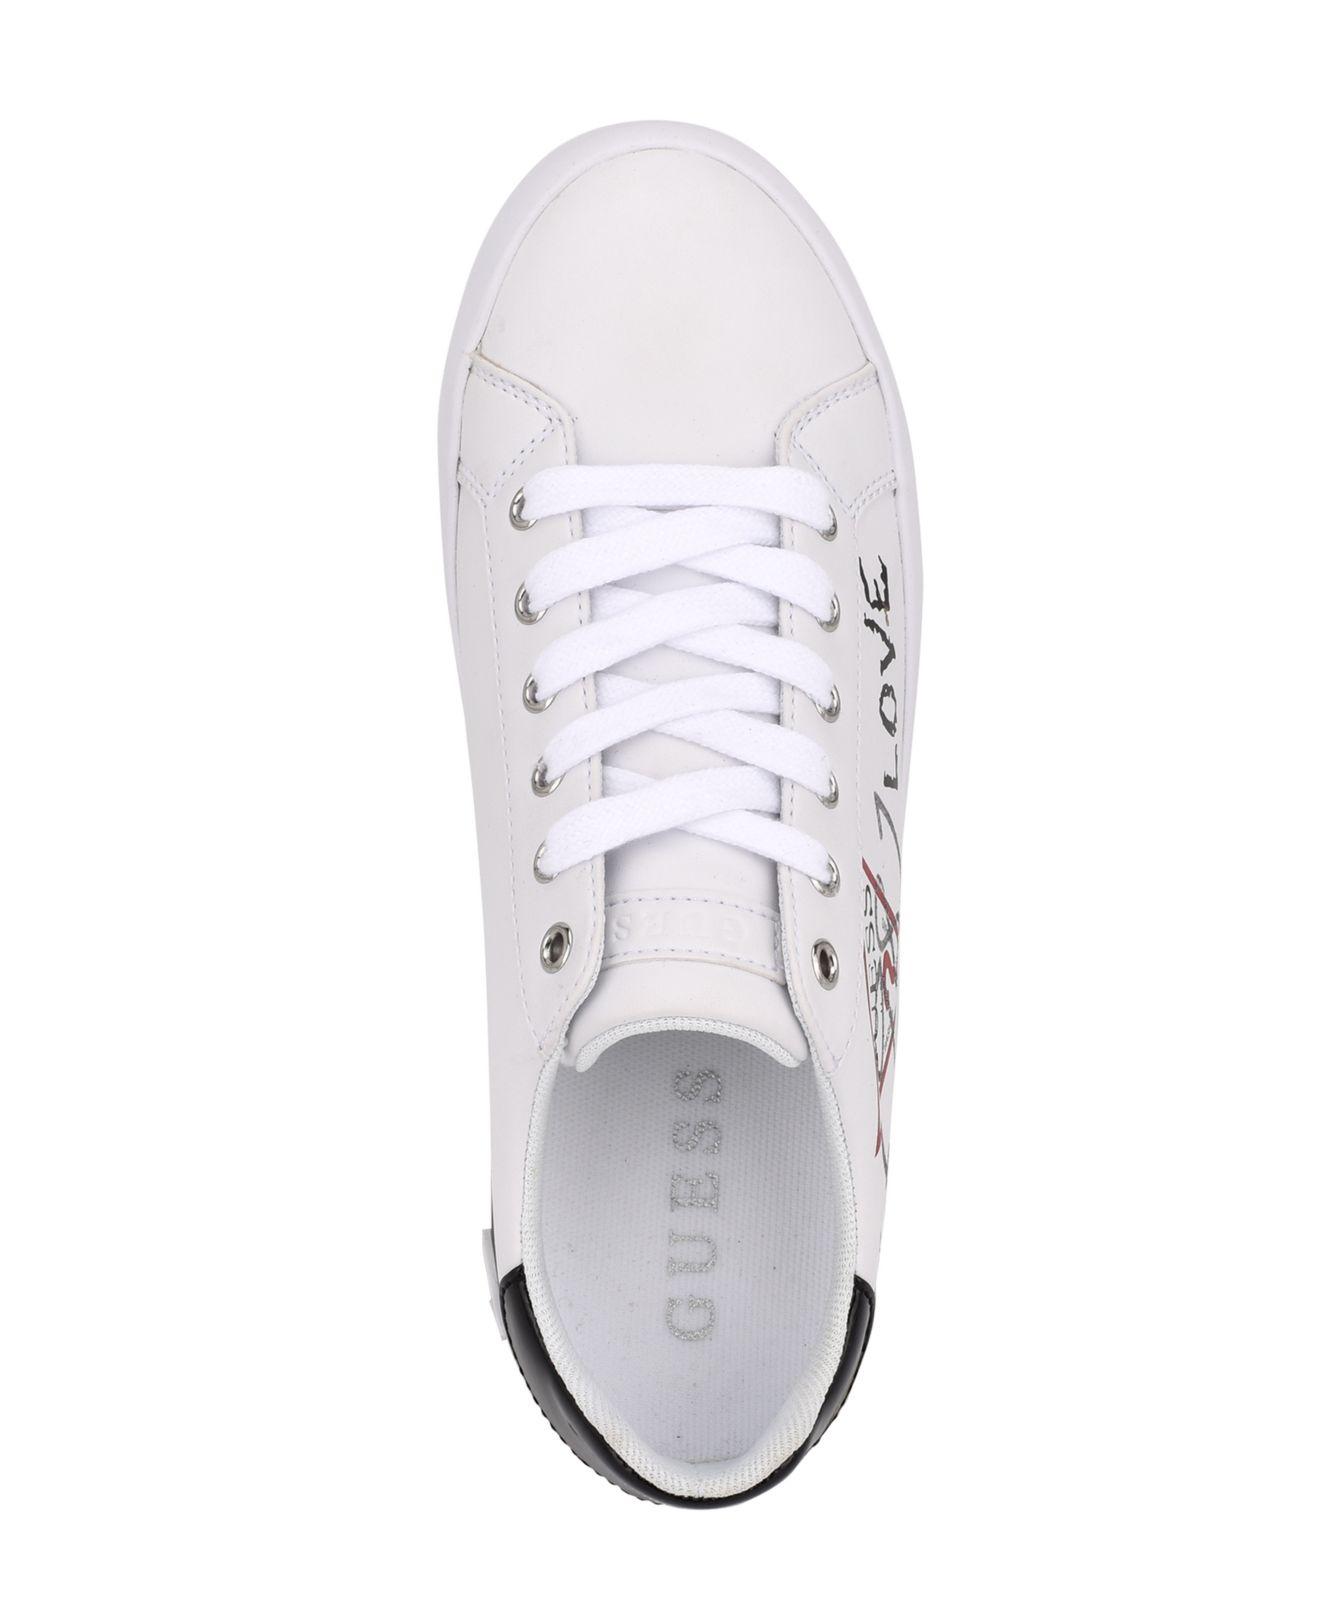 Guess Pathin Lace-up Sneakers in White | Lyst